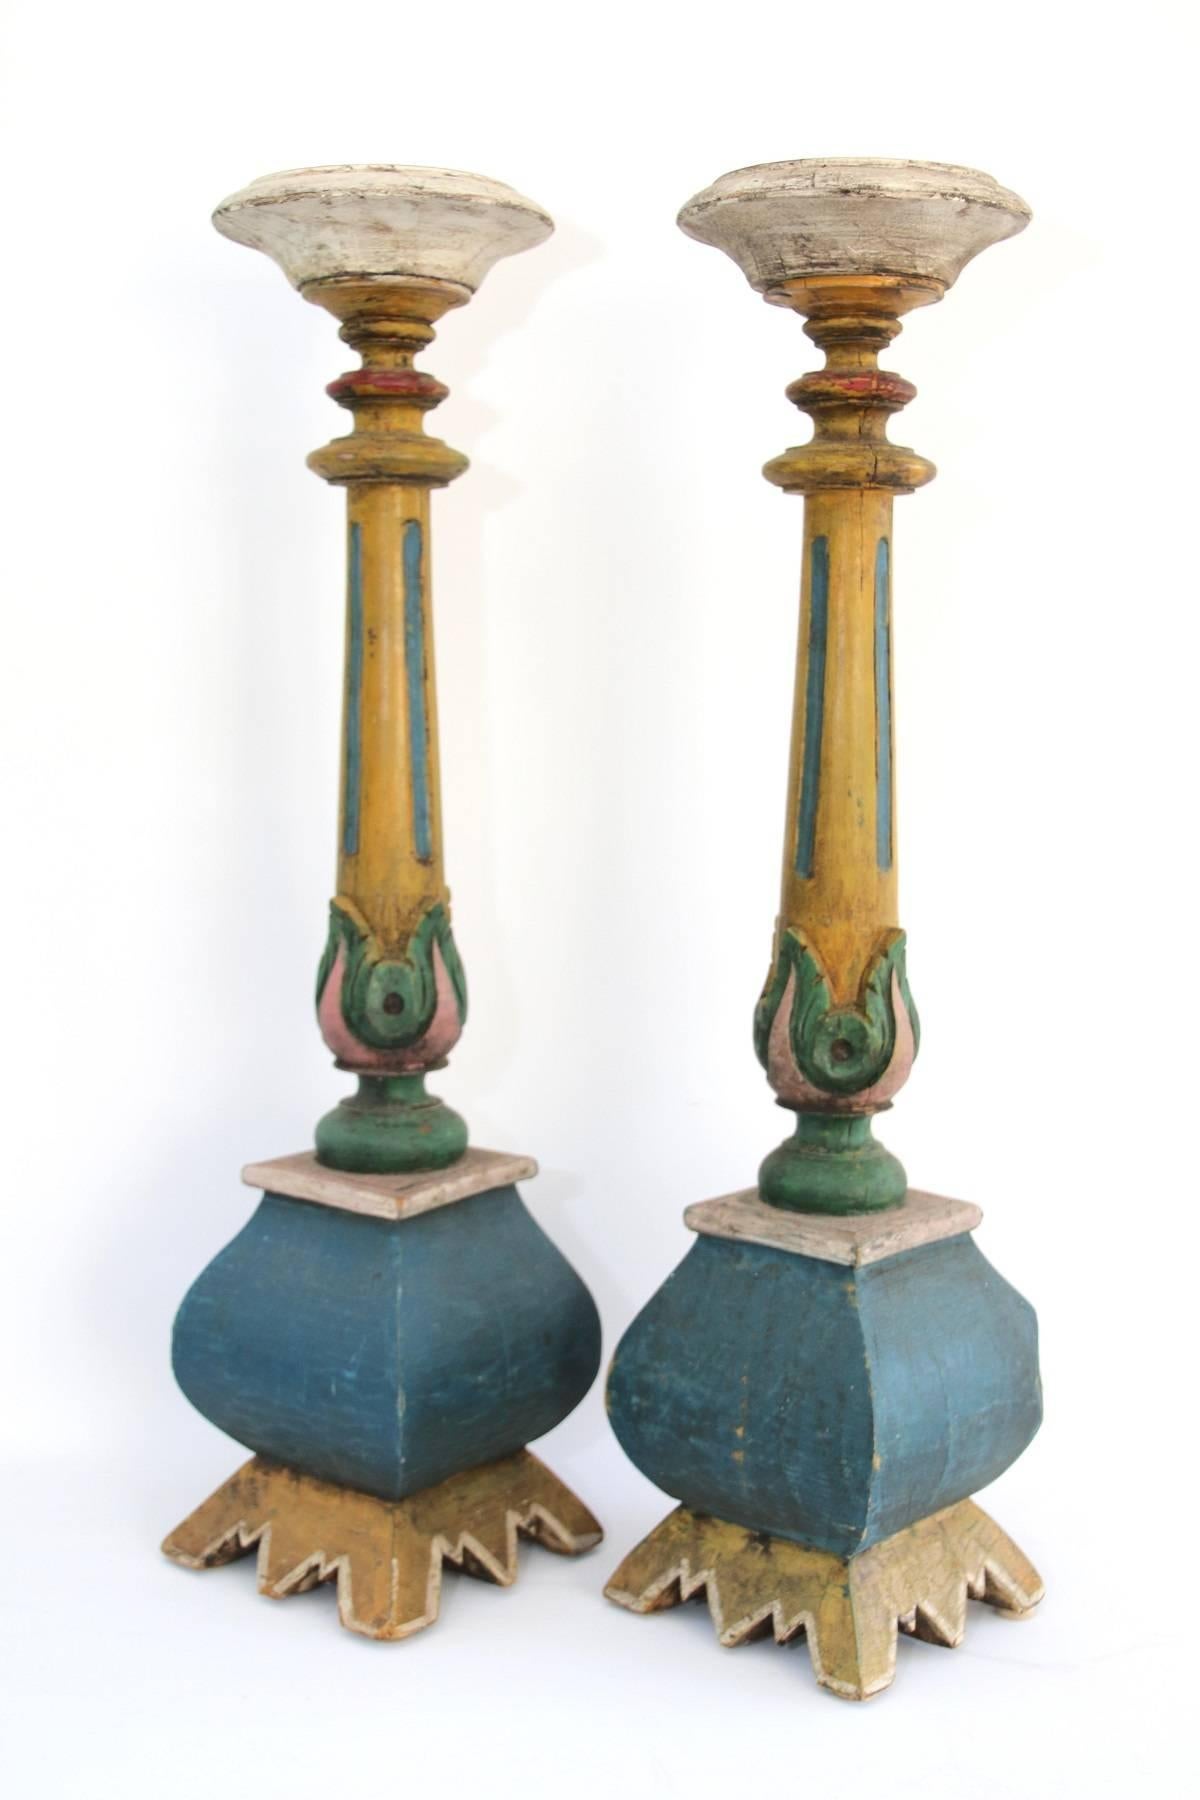 Pair of 19th century American polychrome paint decorated candle pillars with floral decoration. Hand-carved pine with original multi-color paint decoration.

Drying crack on one side of each pillar as shown in photos.

Measure: 25 ¾” high.
 